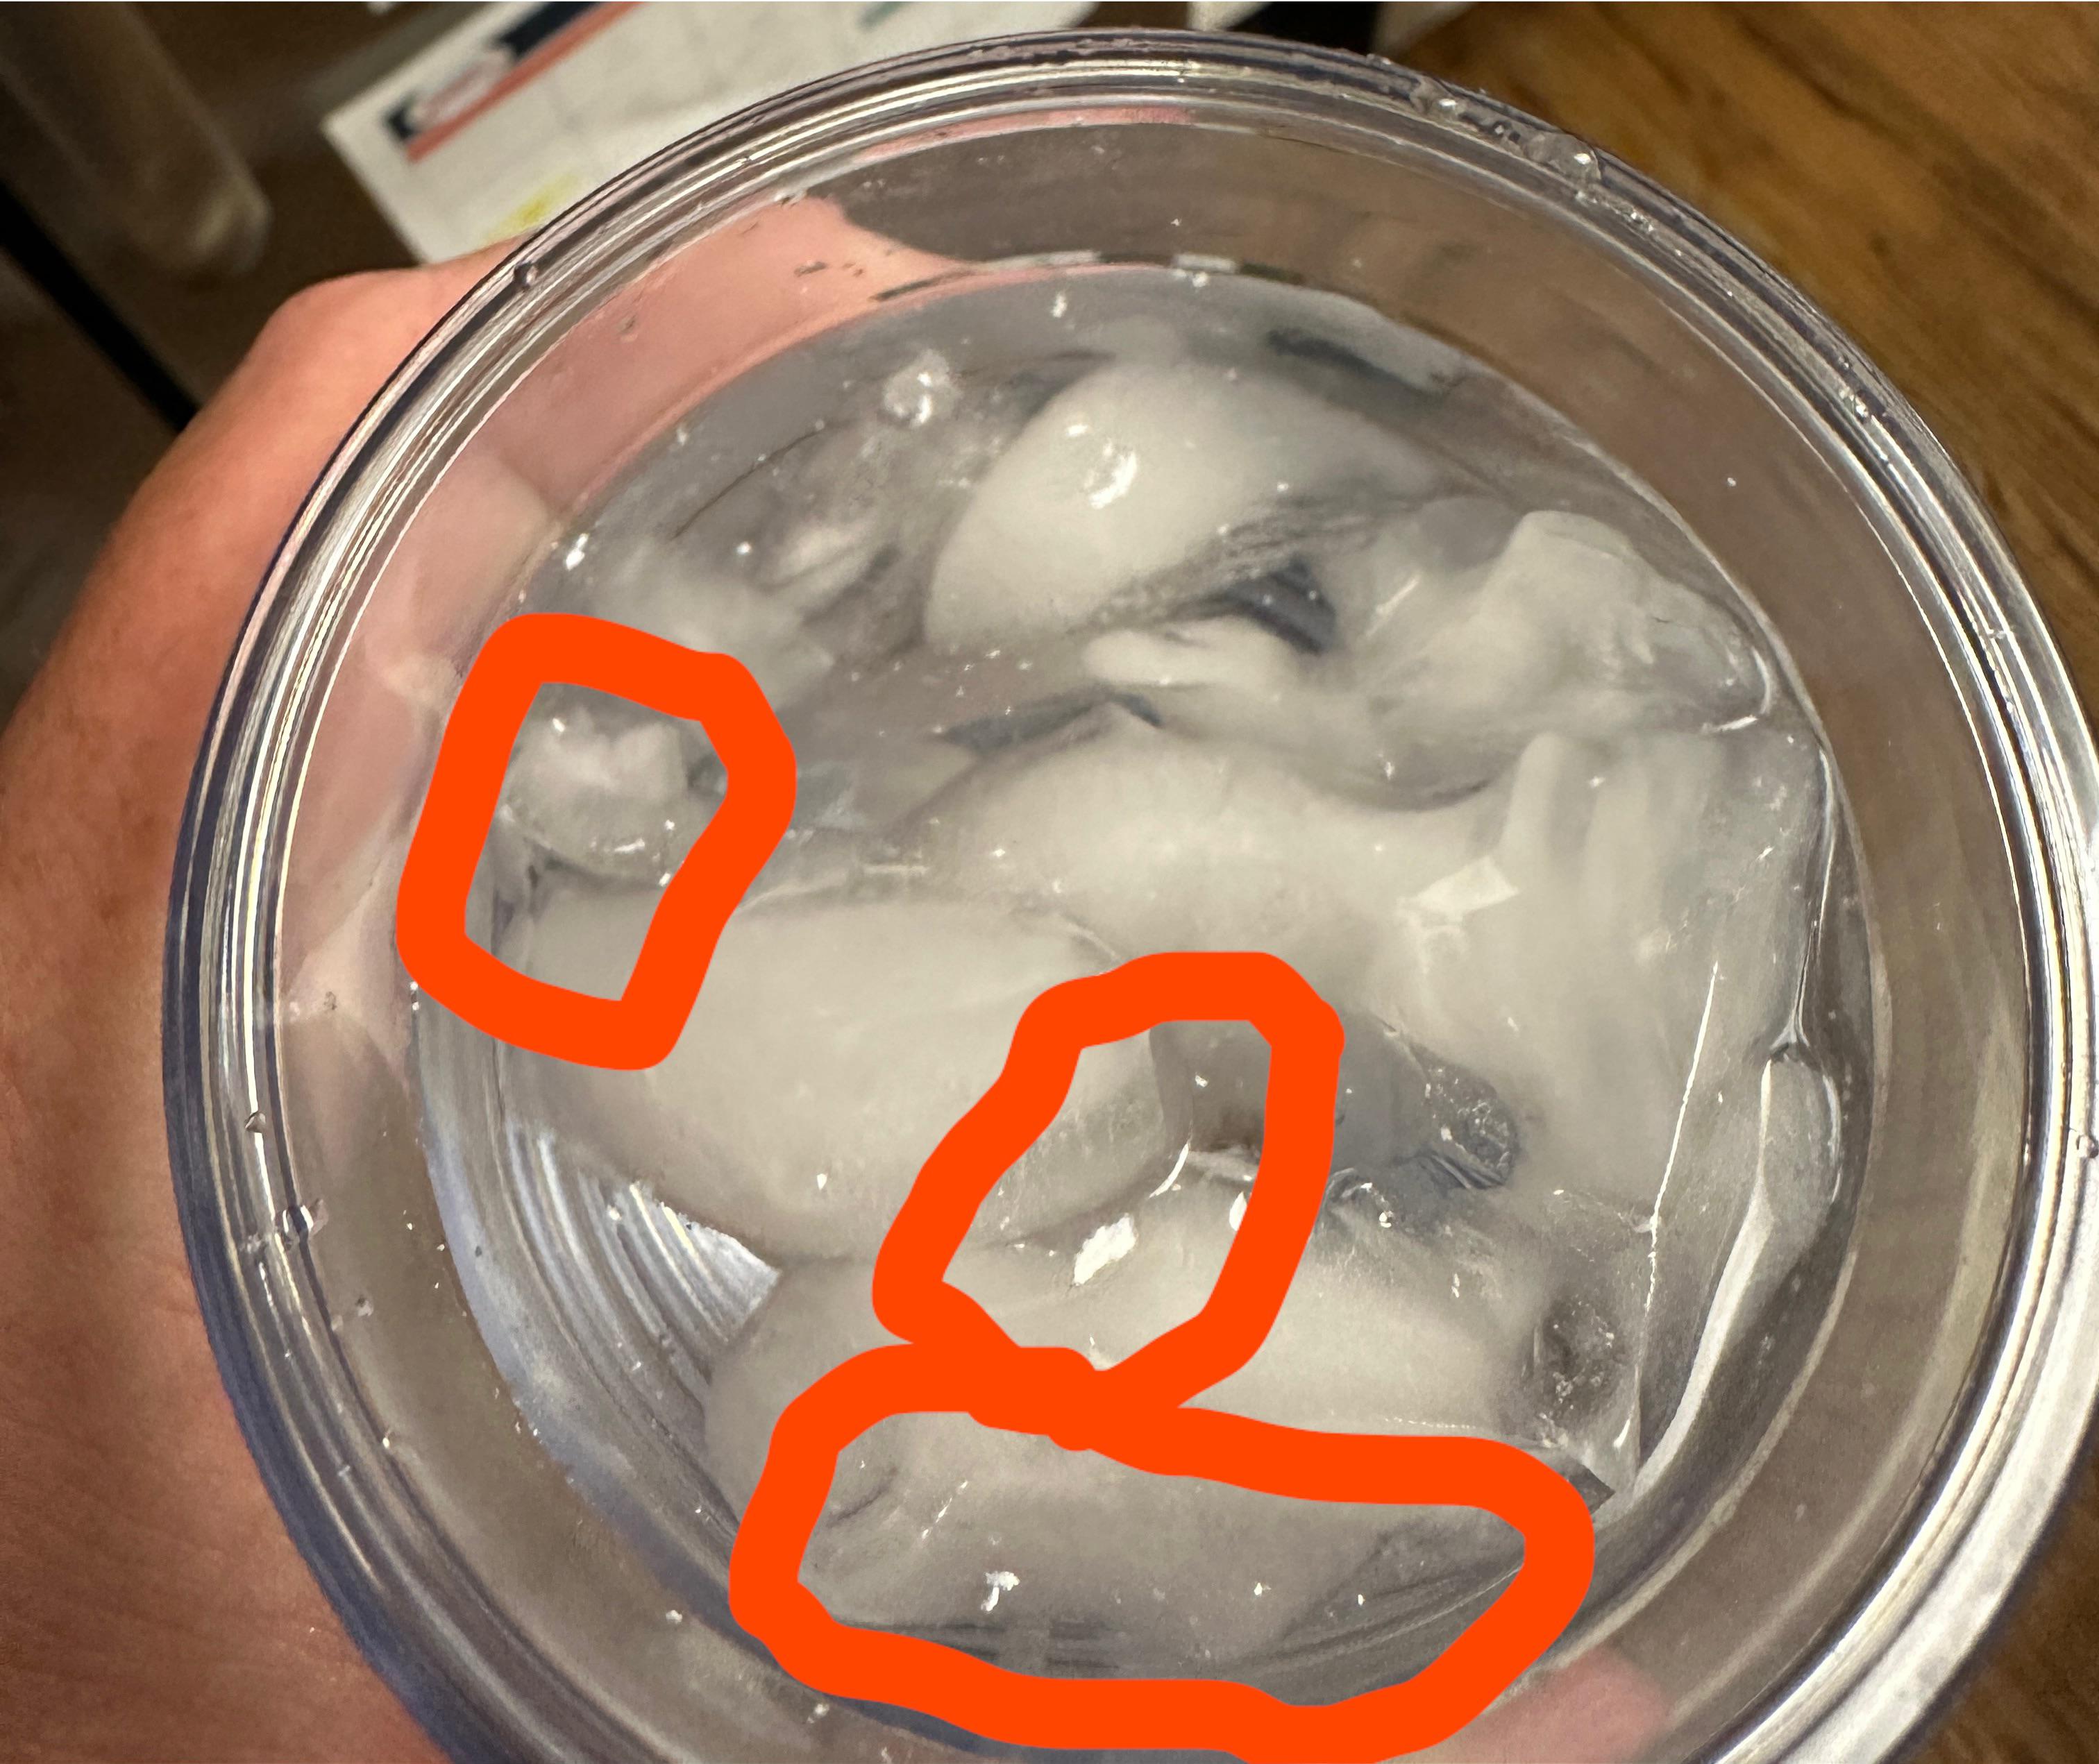 What are white bits in my ice water from my fridge? Google says maybe calcium carbonate from hard wa